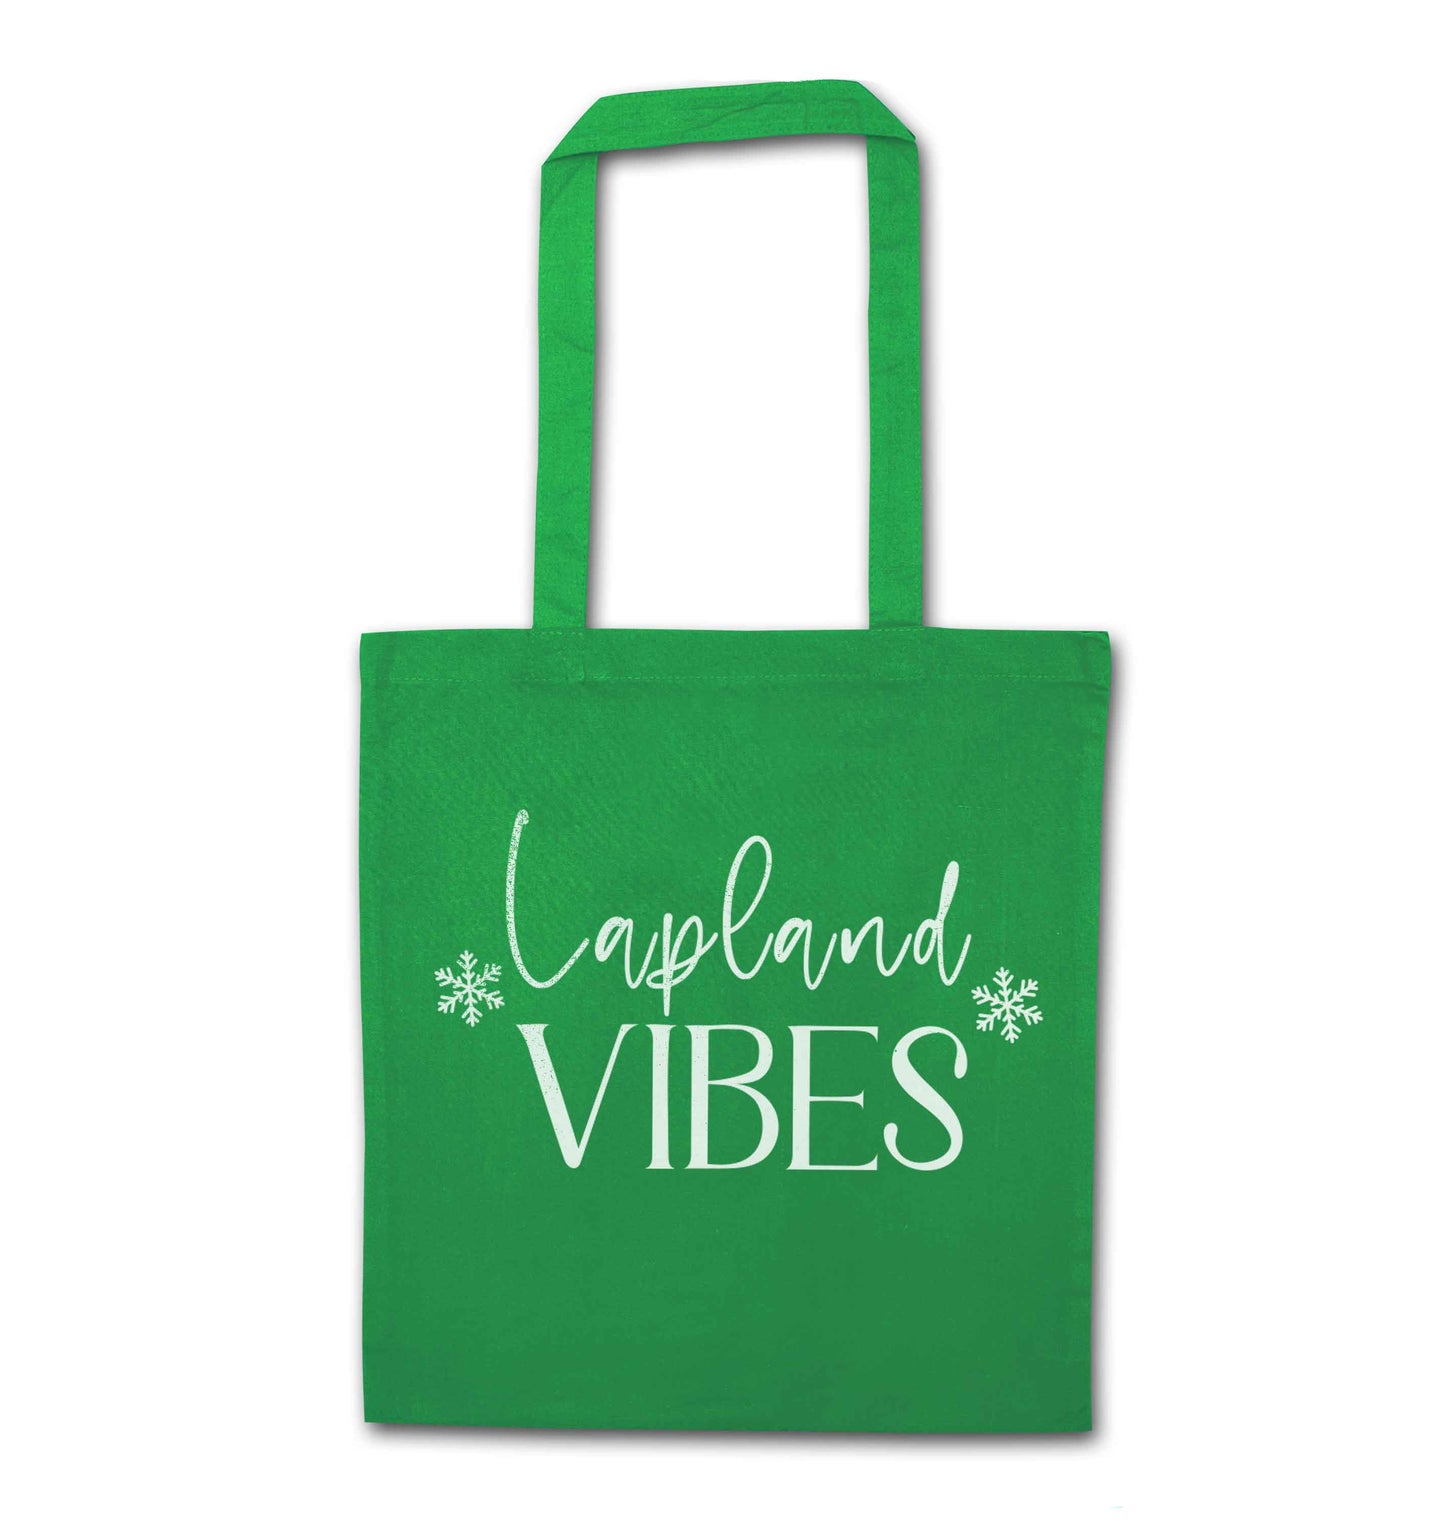 Lapland vibes green tote bag